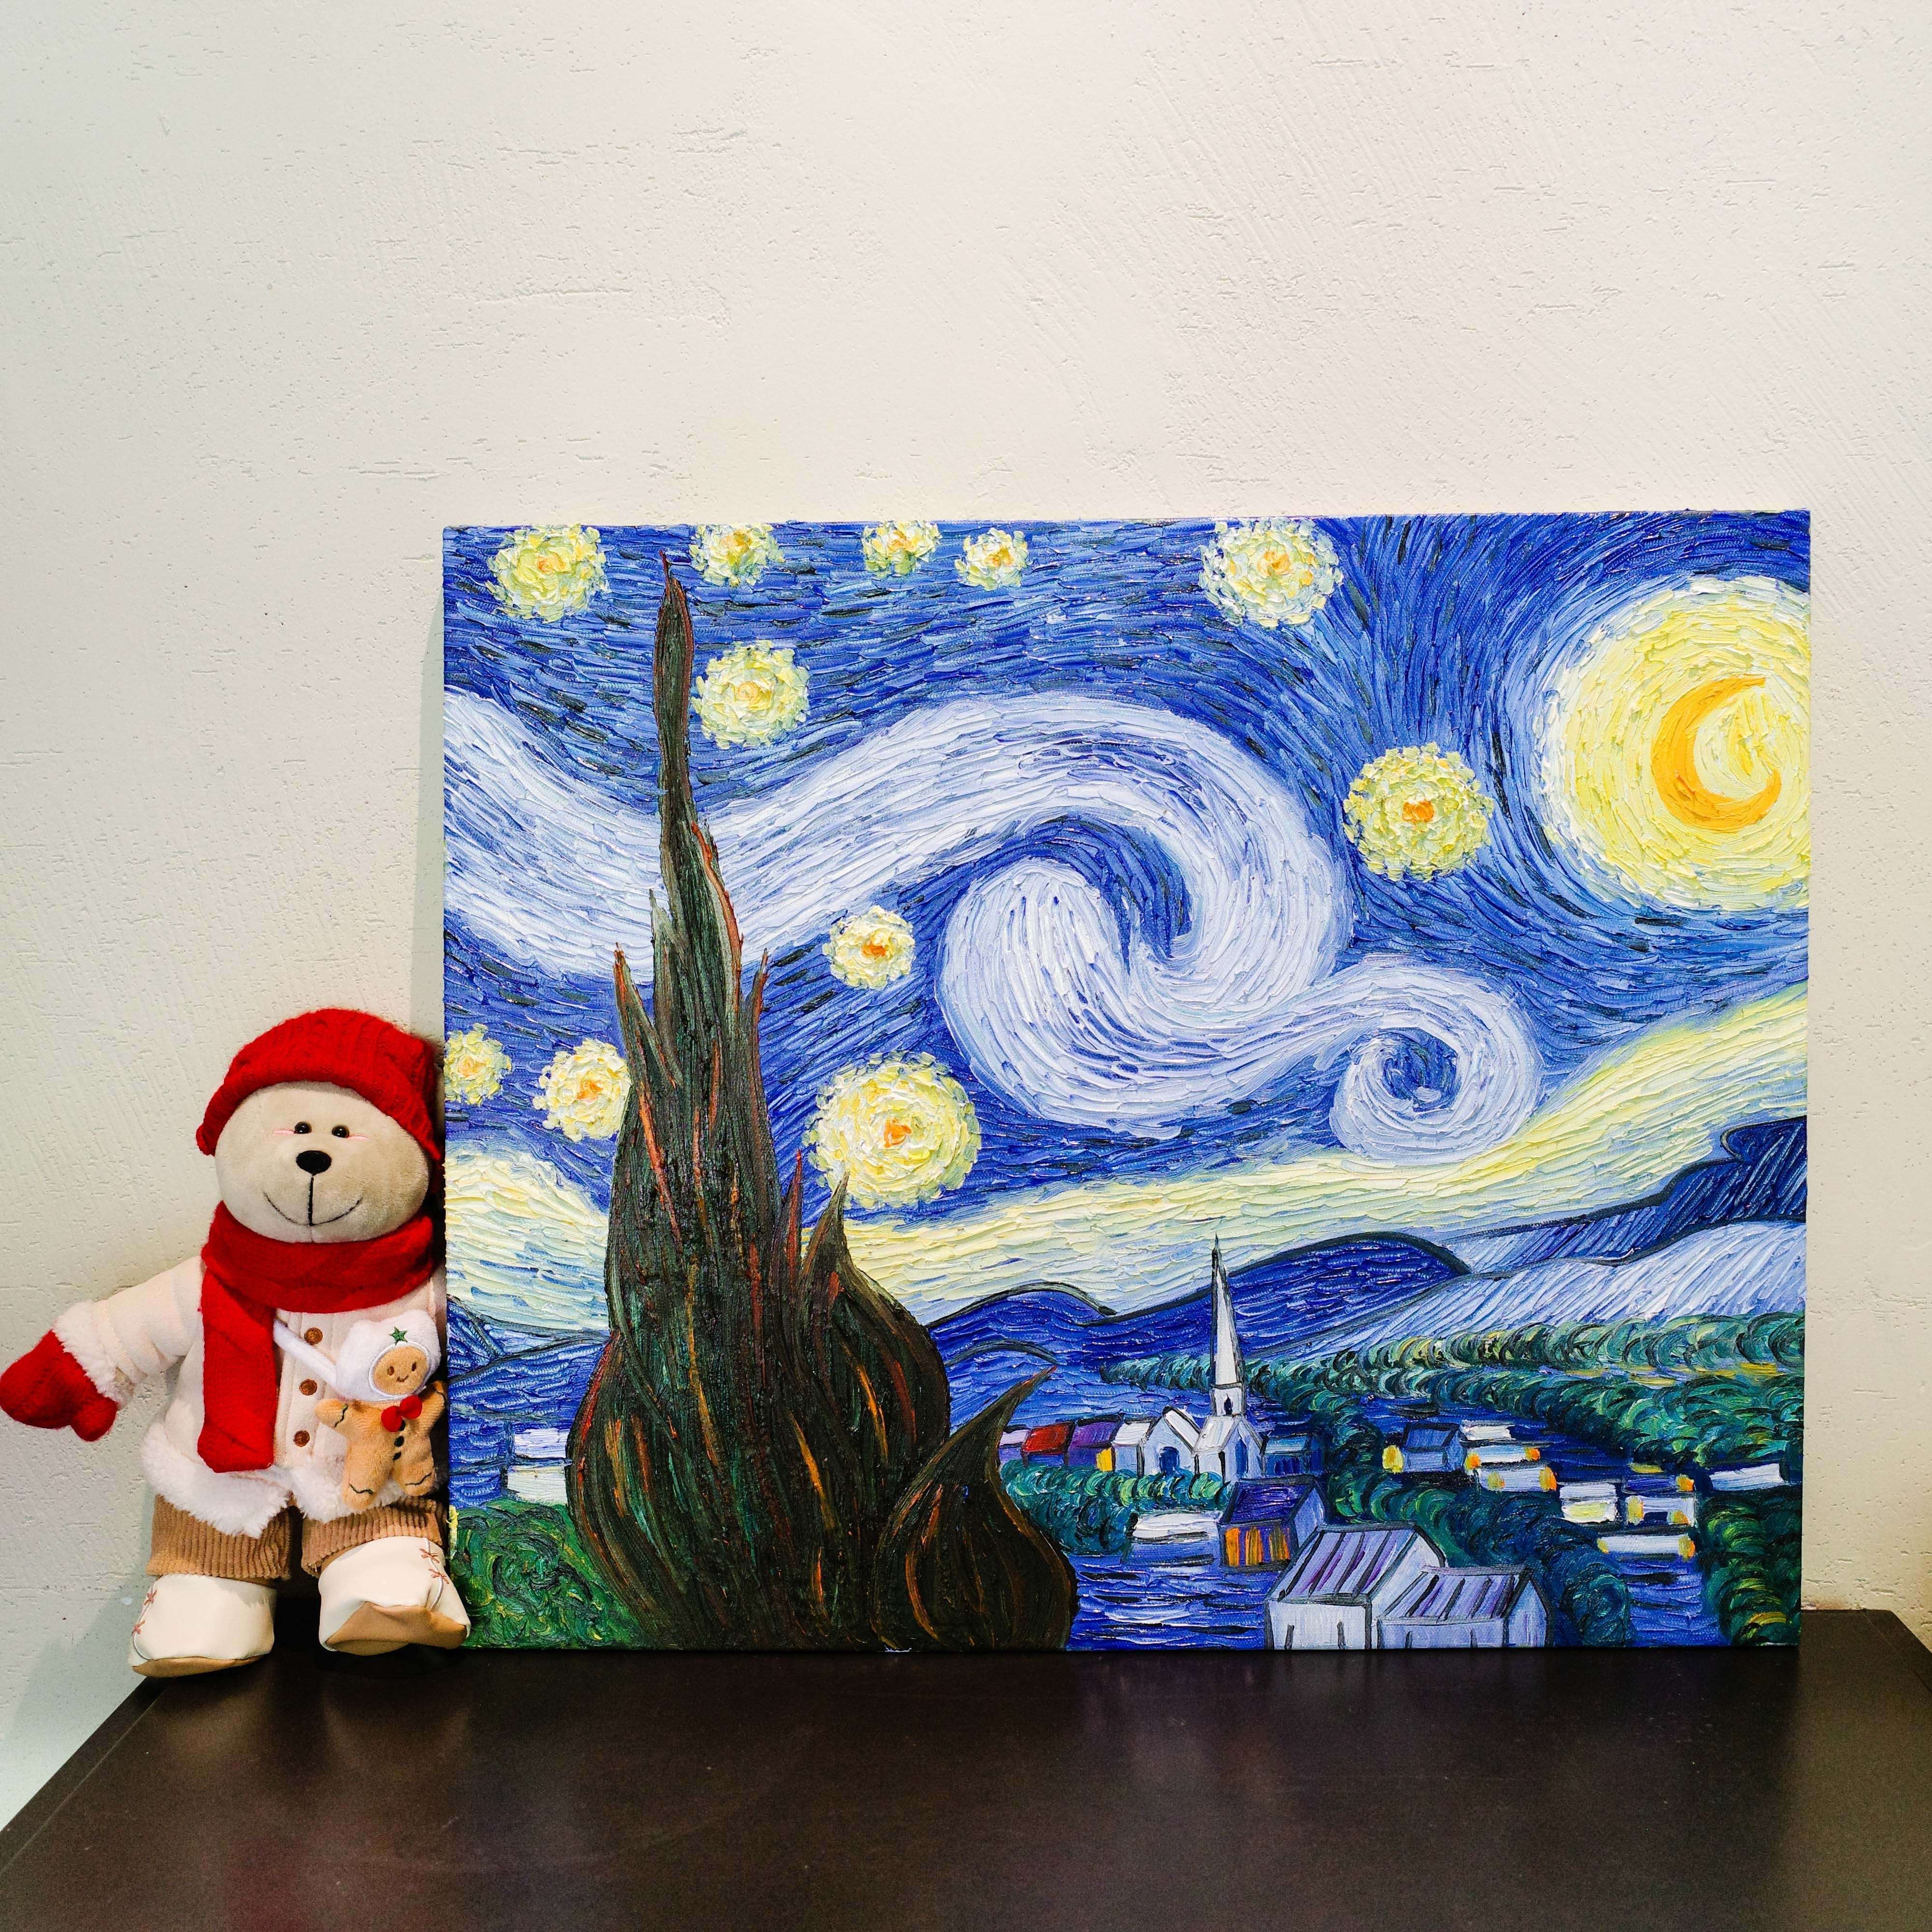 The Starry Night - Vincent van Gogh as art print or hand painted oil.